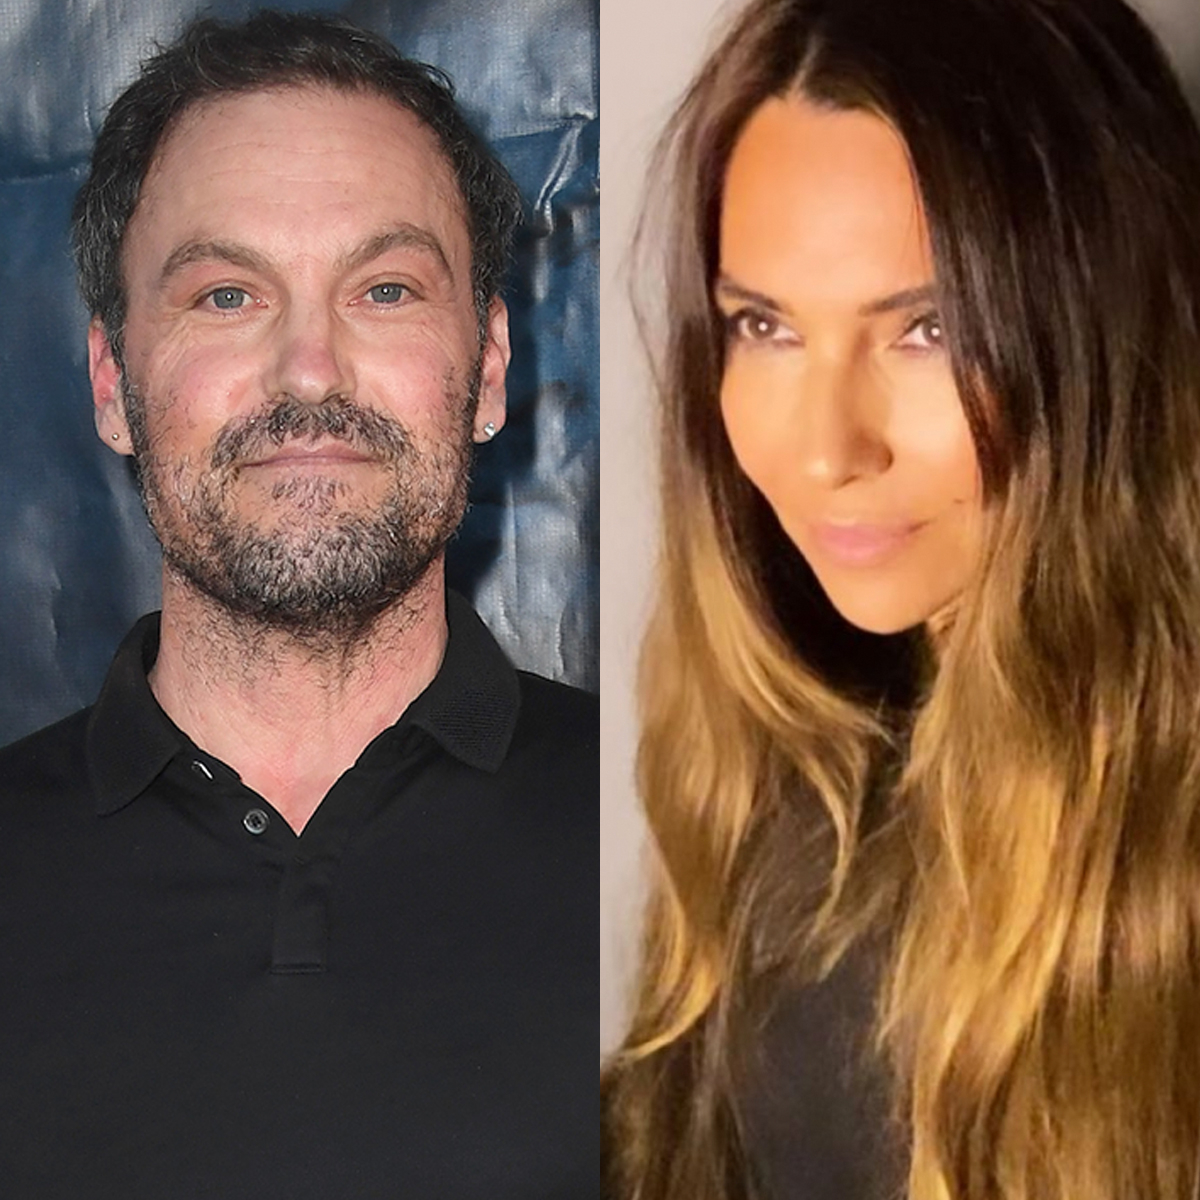 Brian Austin Green Calls Out Ex Vanessa Marcil for Claiming She Raised Their Son Kassius "Alone"